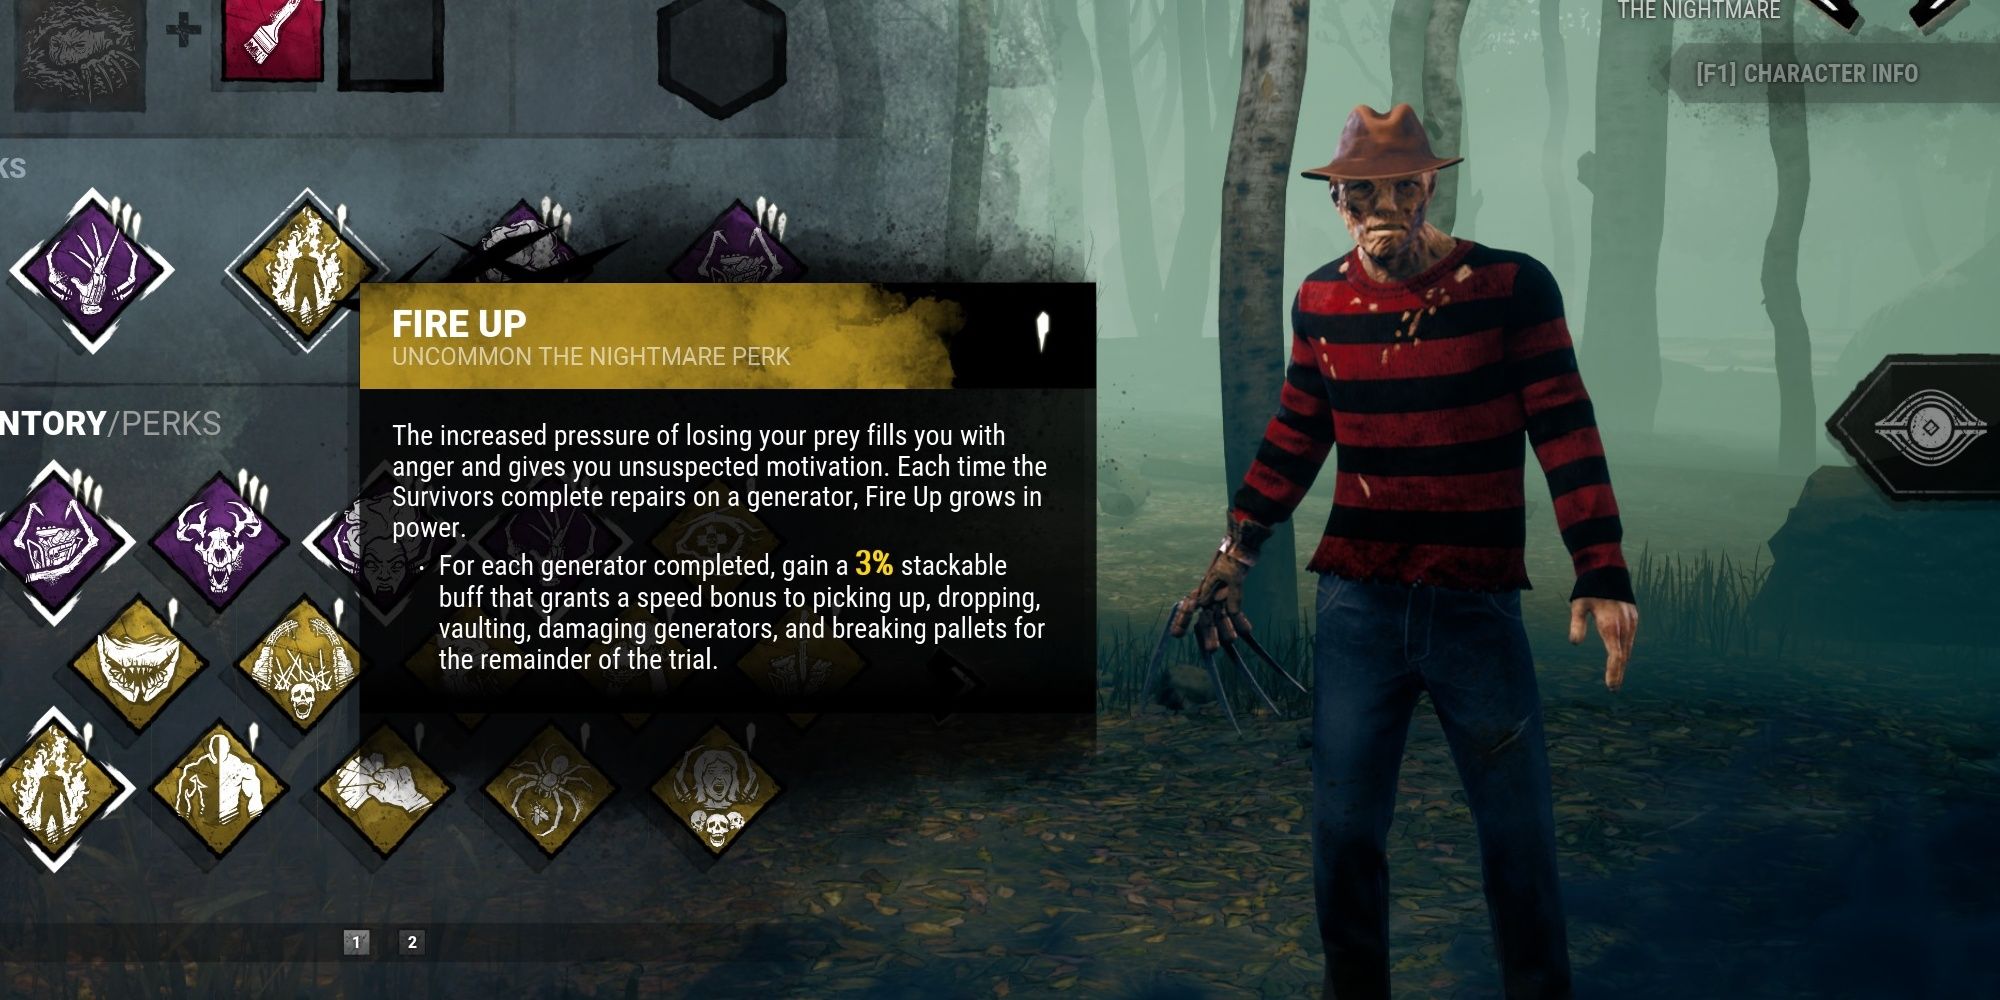 Fire Up is a Nightmare perk unlocked at level 30 on his Bloodweb, at max rank the stacking buff is at 4%